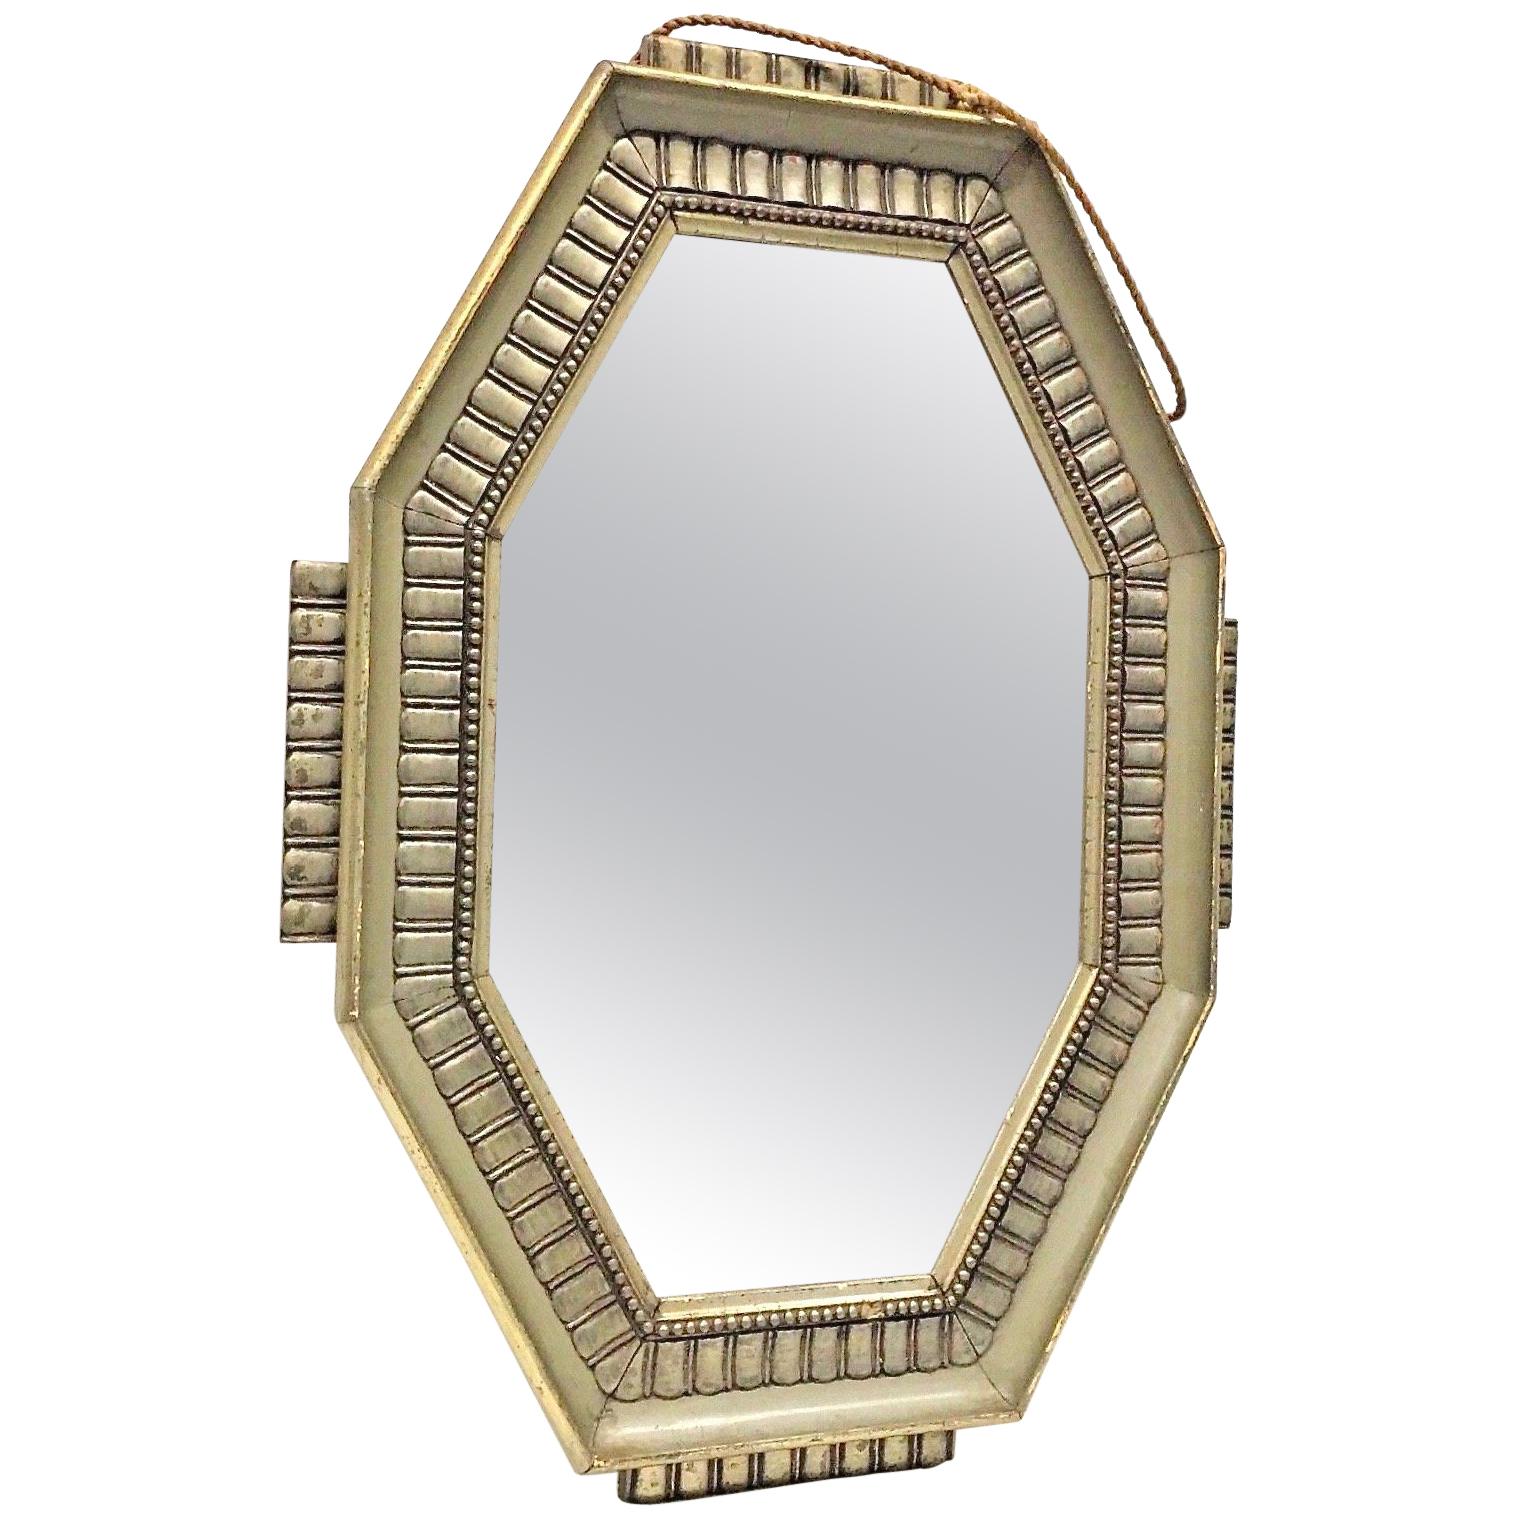 A gorgeous French Art Deco wall mirror. Beautiful wooden frame, original mirror glass. With some signs of wear as expected with age and use. A nice addition to any room.